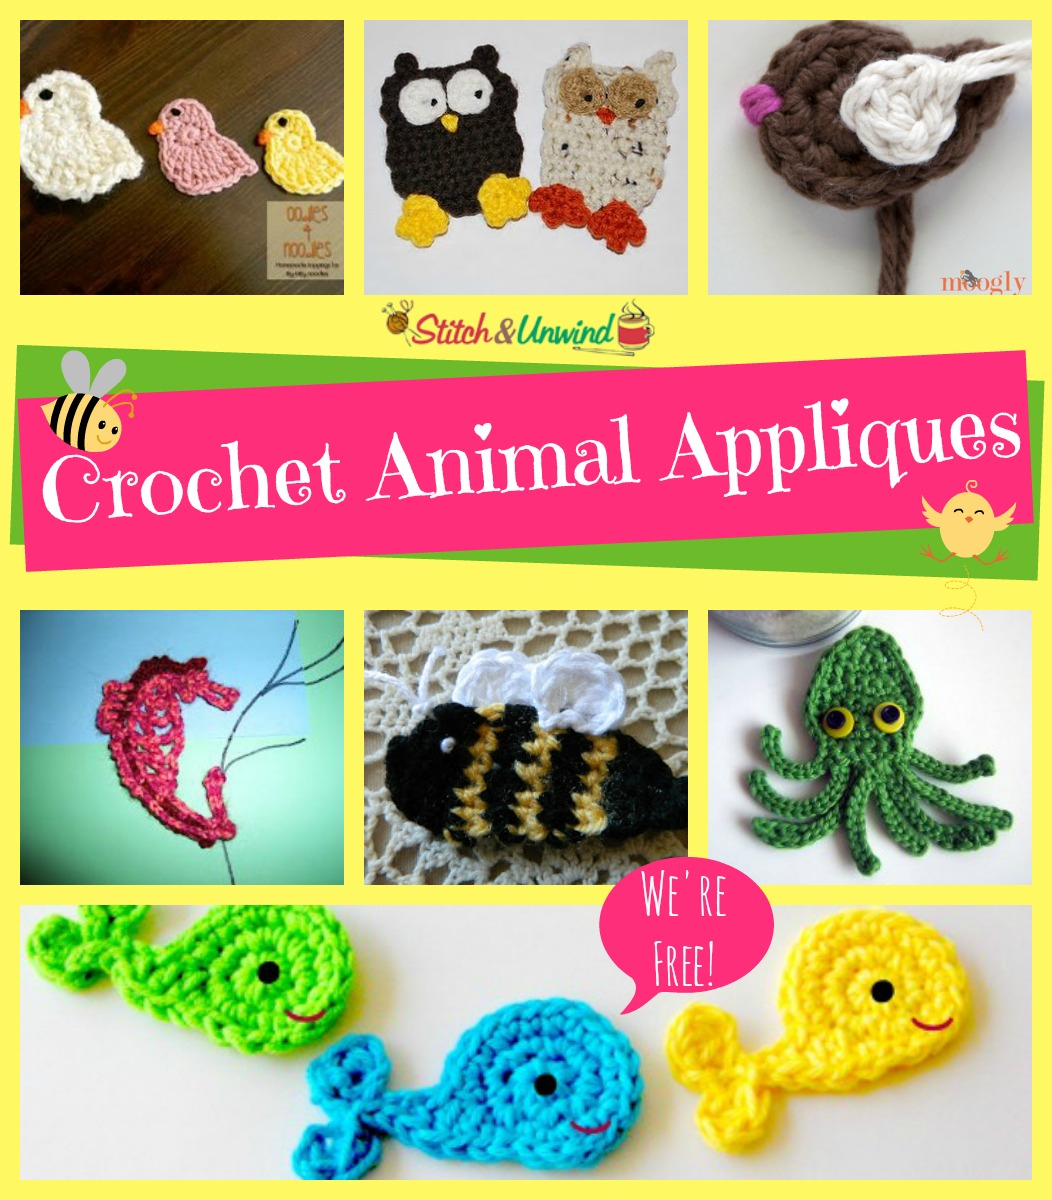 Crochet Applique Patterns Free Add Flair To Your Afghans Free Crochet Applique Patterns